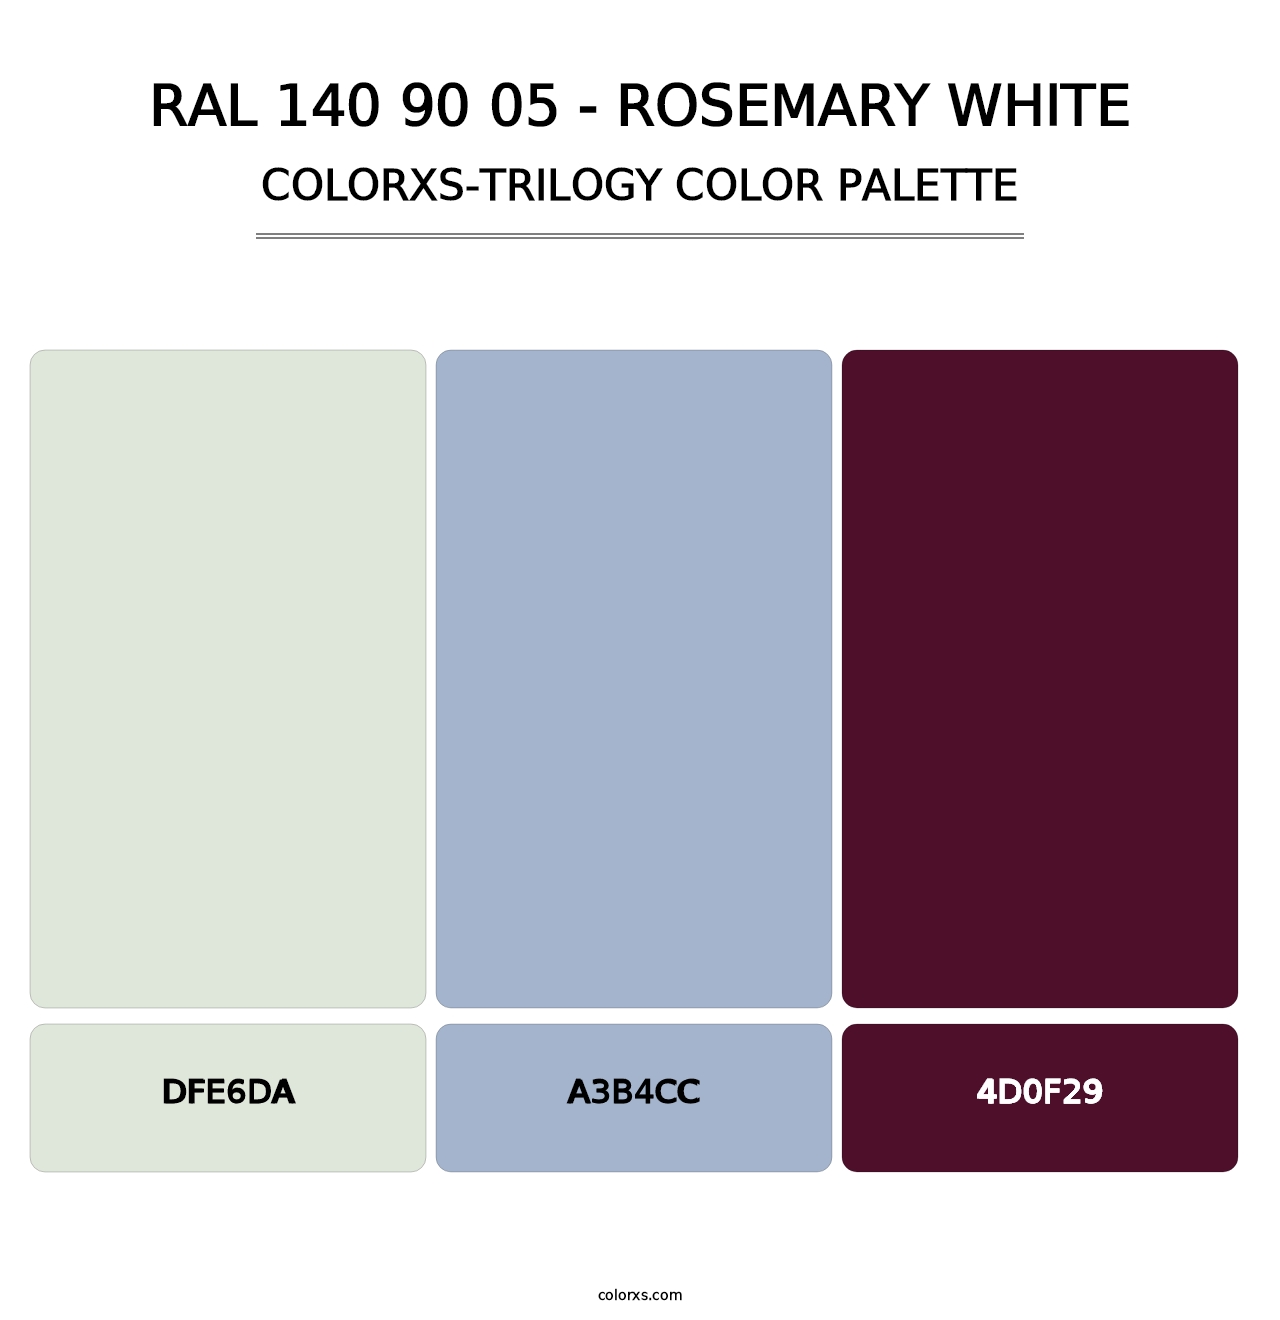 RAL 140 90 05 - Rosemary White - Colorxs Trilogy Palette